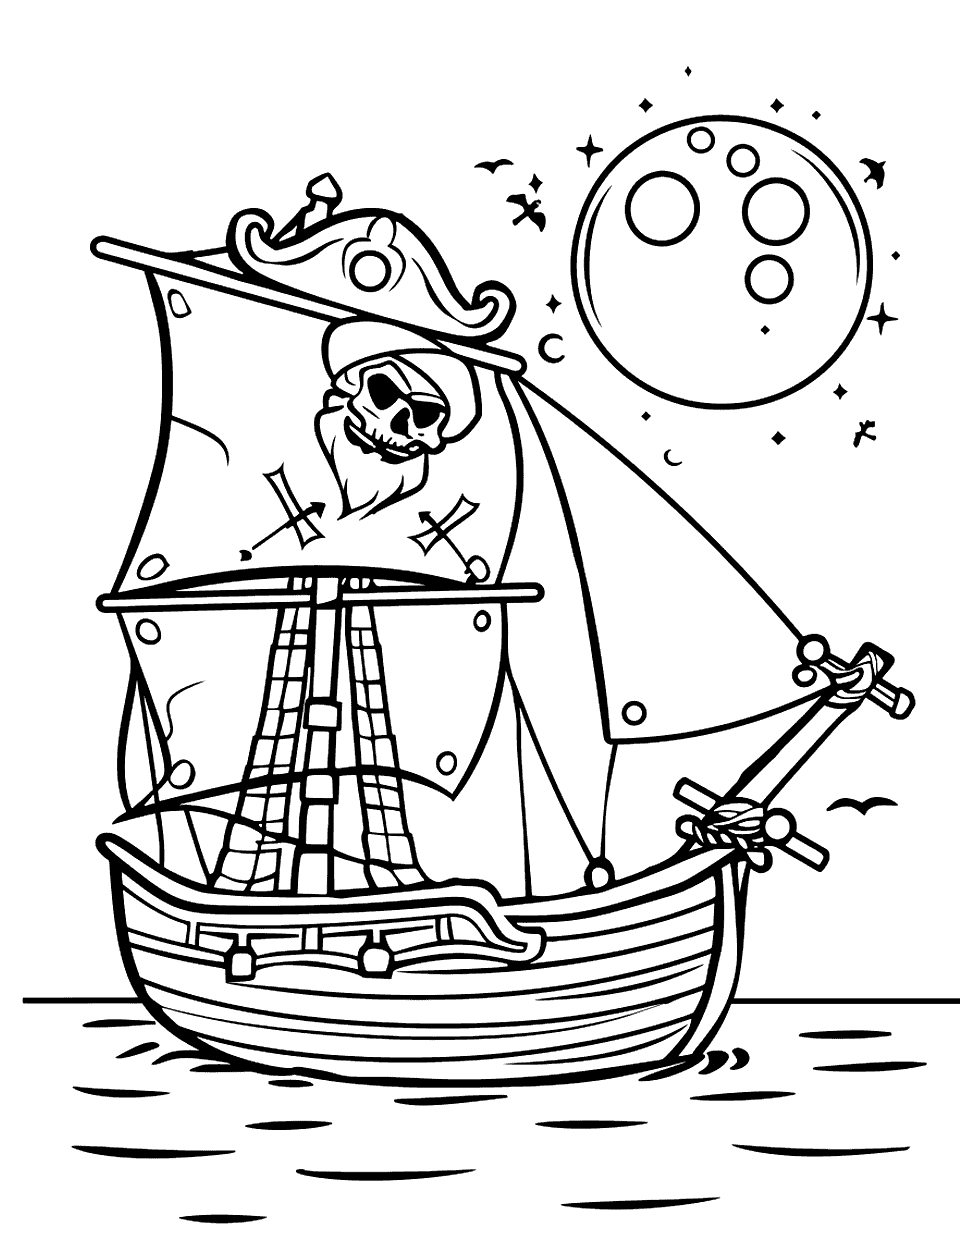 Pirate Ship Under Full Moon Coloring Page - A pirate ship sailing under a bright full moon.